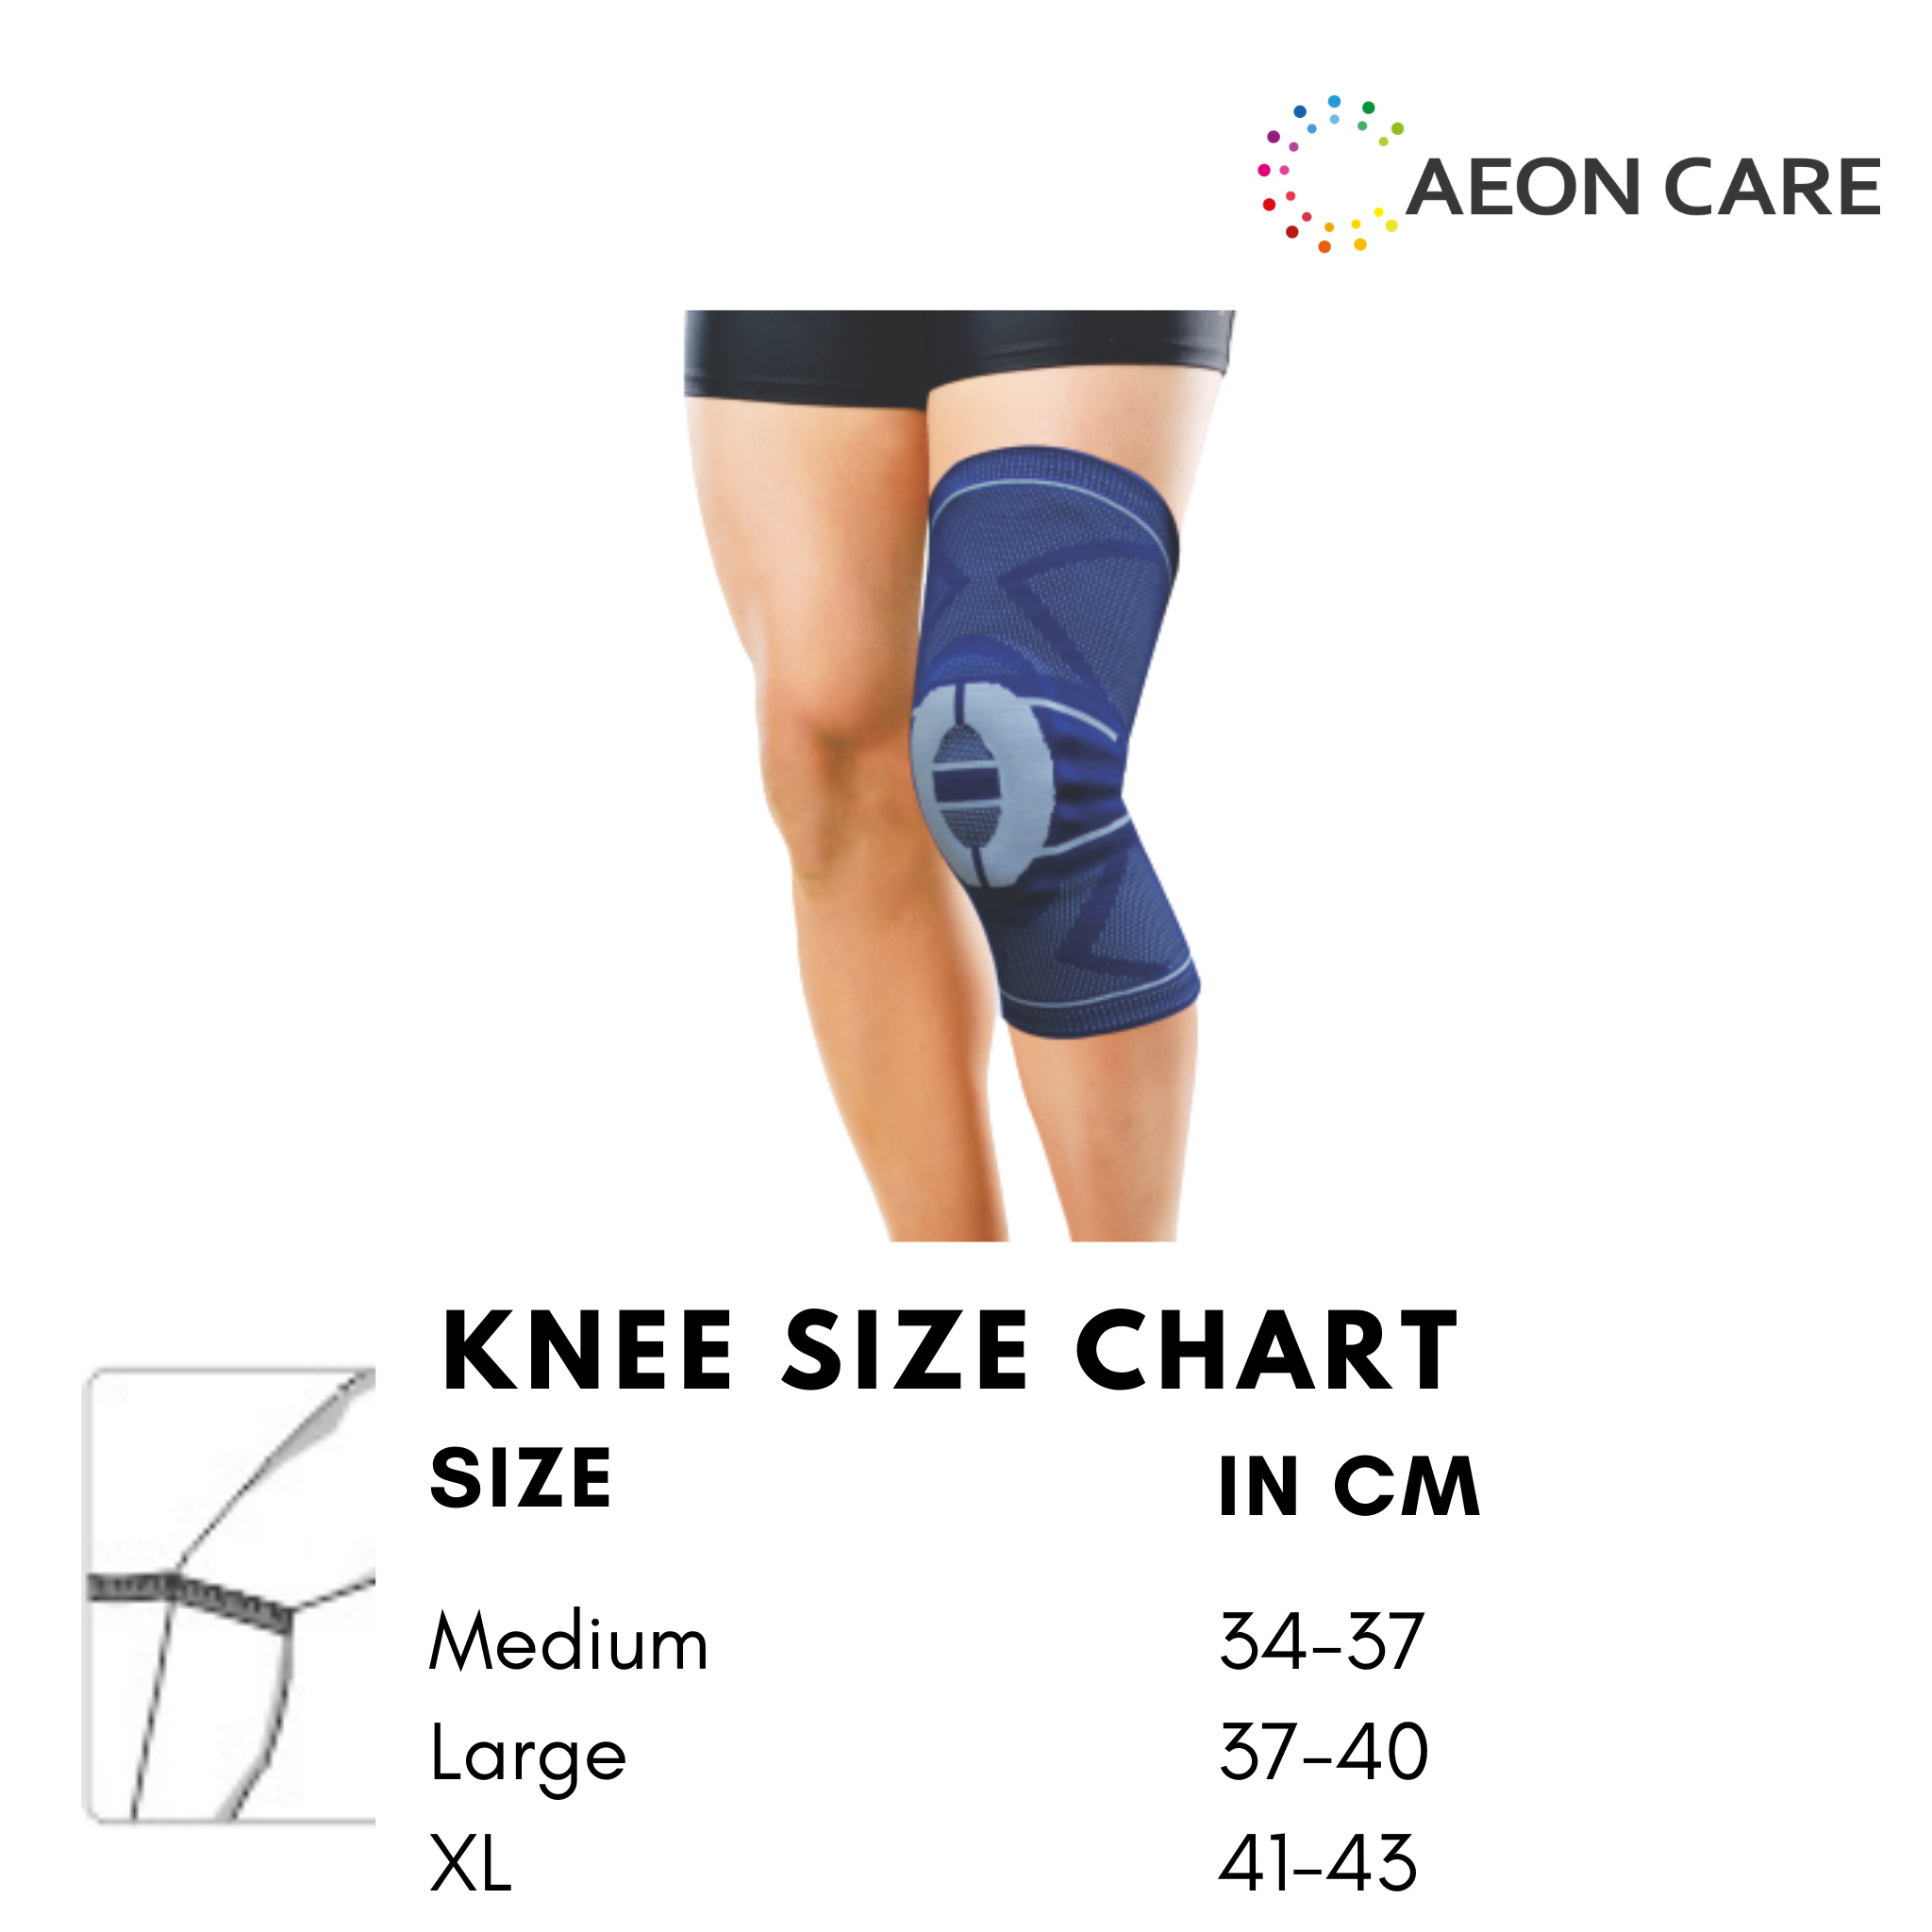 Knee Brace Size Chart for Knee. Knee Brace are available in AeonCare